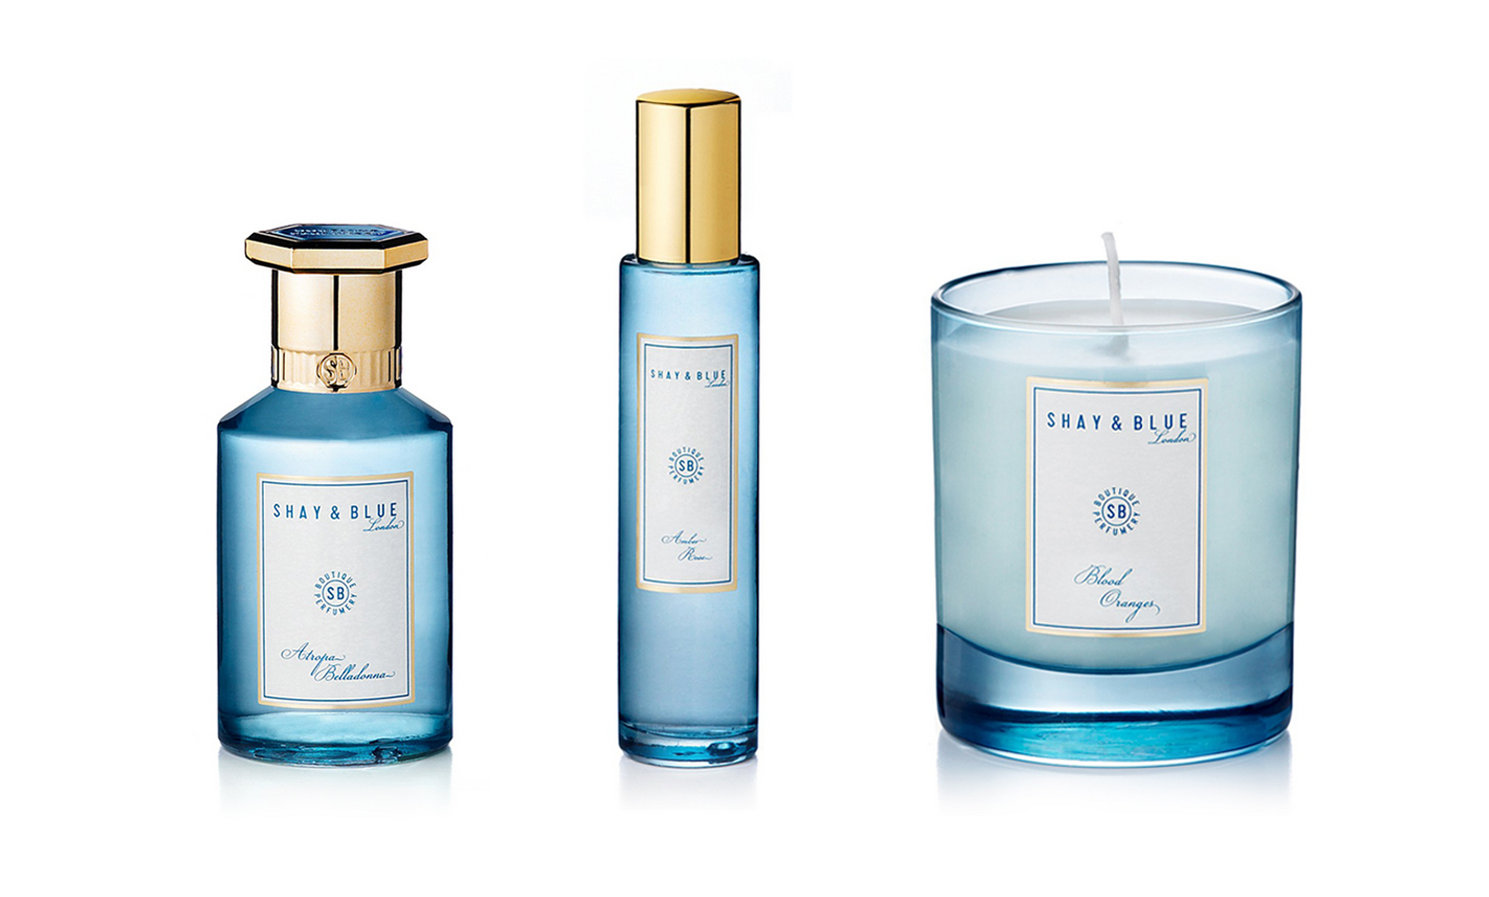 Shay & Blue Fragrances and Candle Product Label Design 1